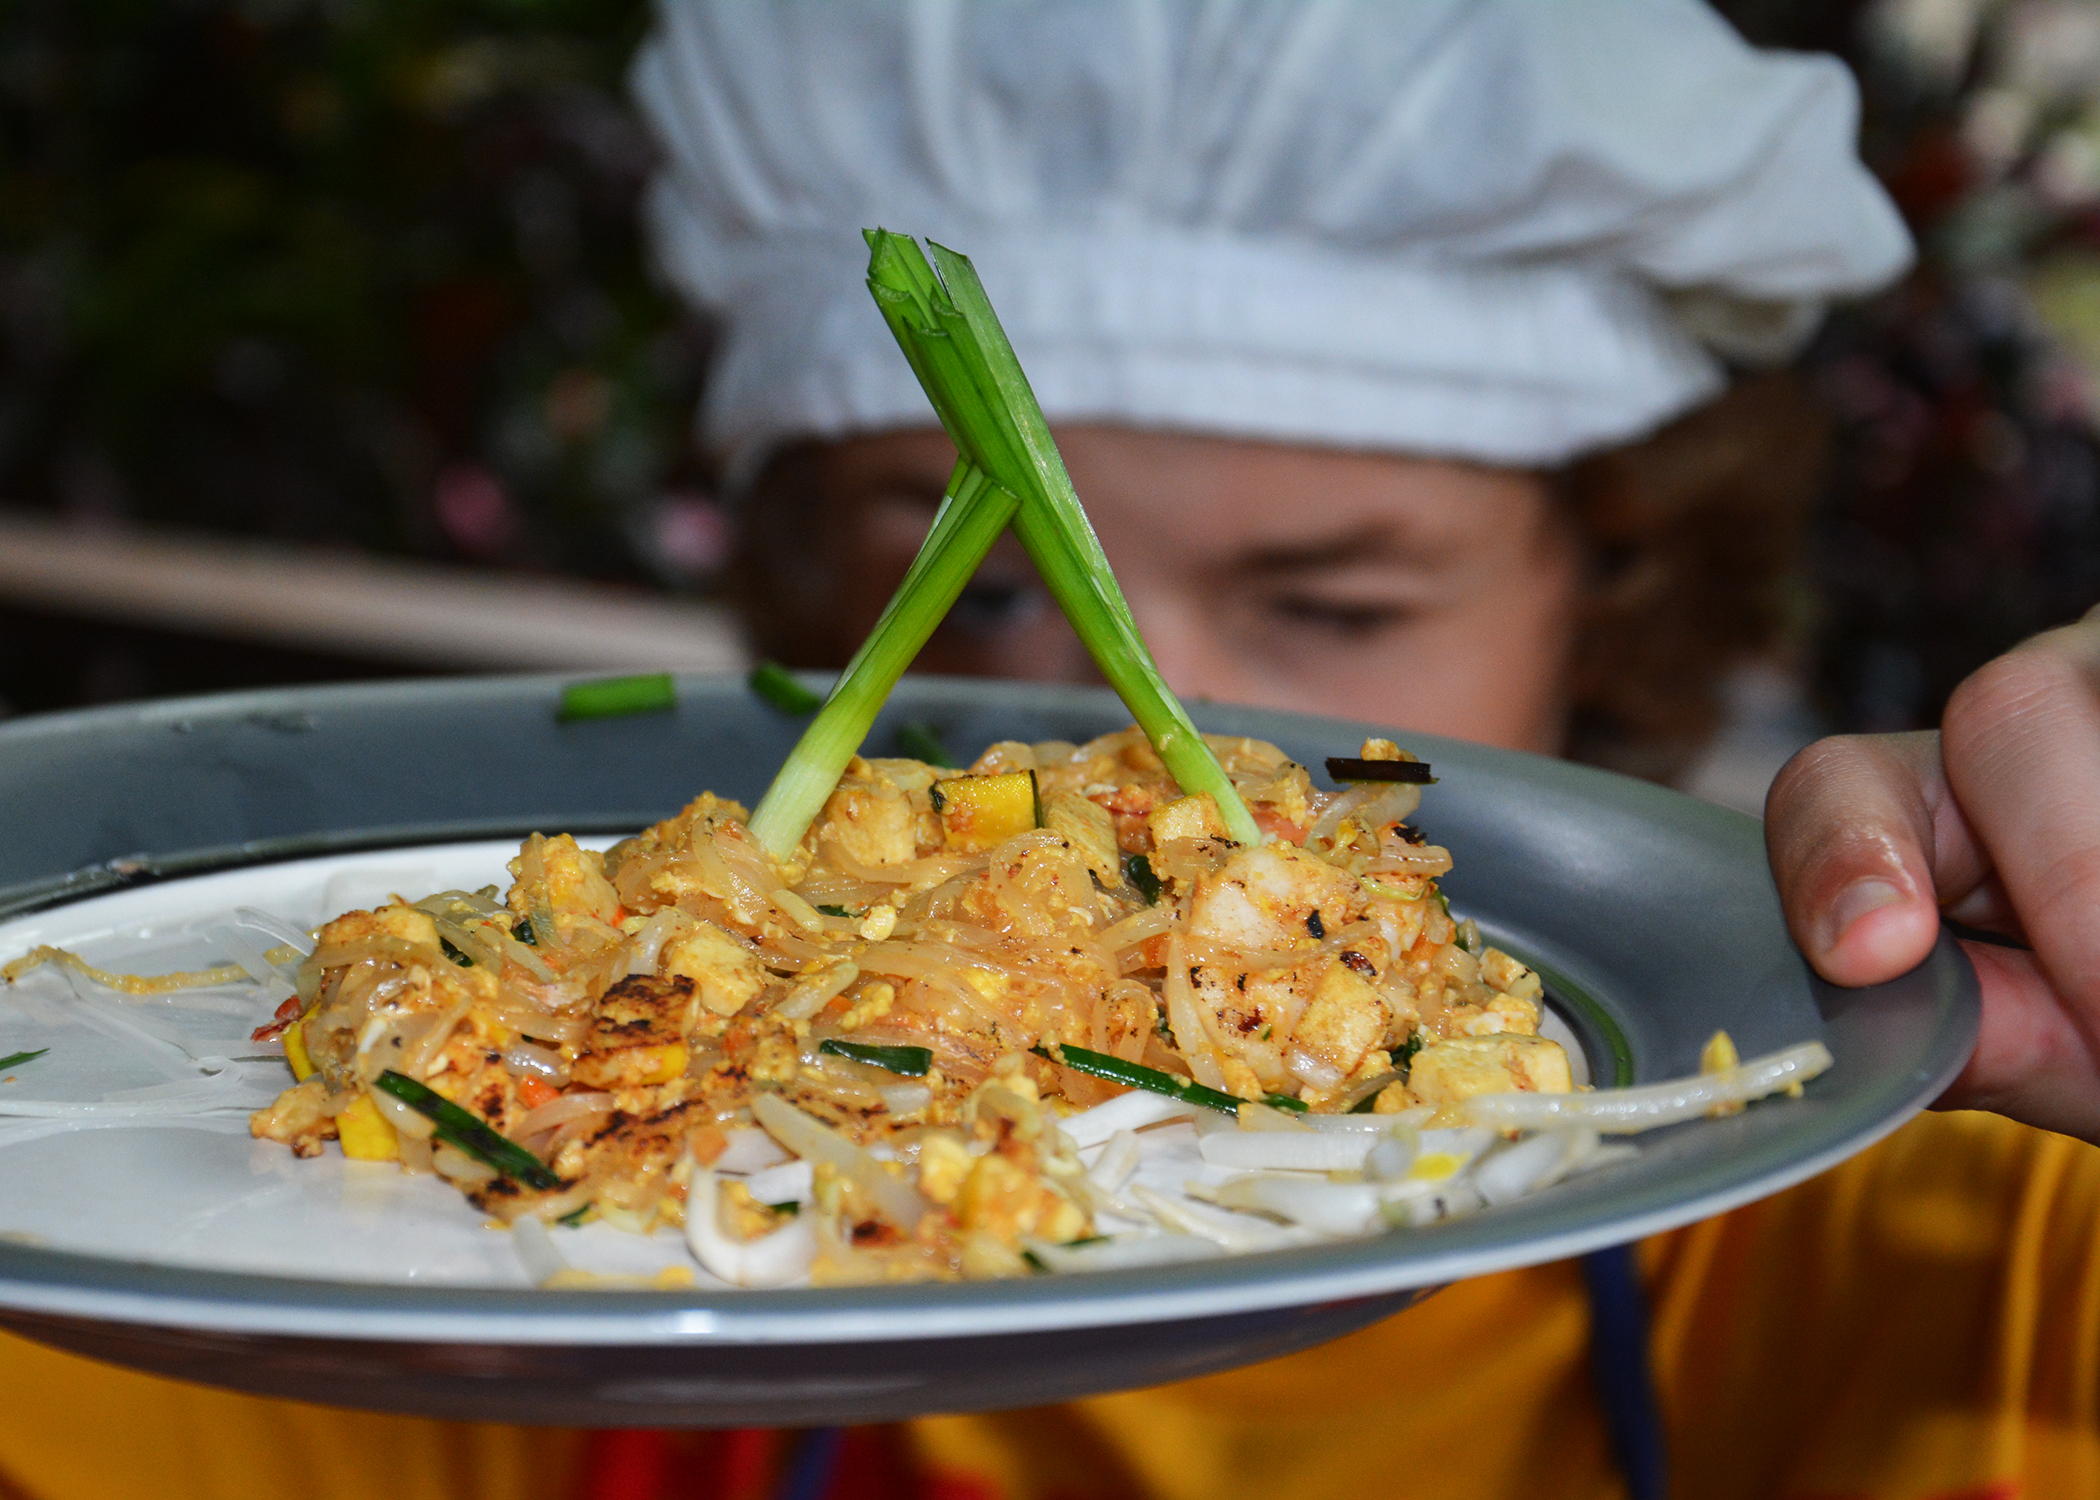 Boy in background holding a plate of Thai food in foreground